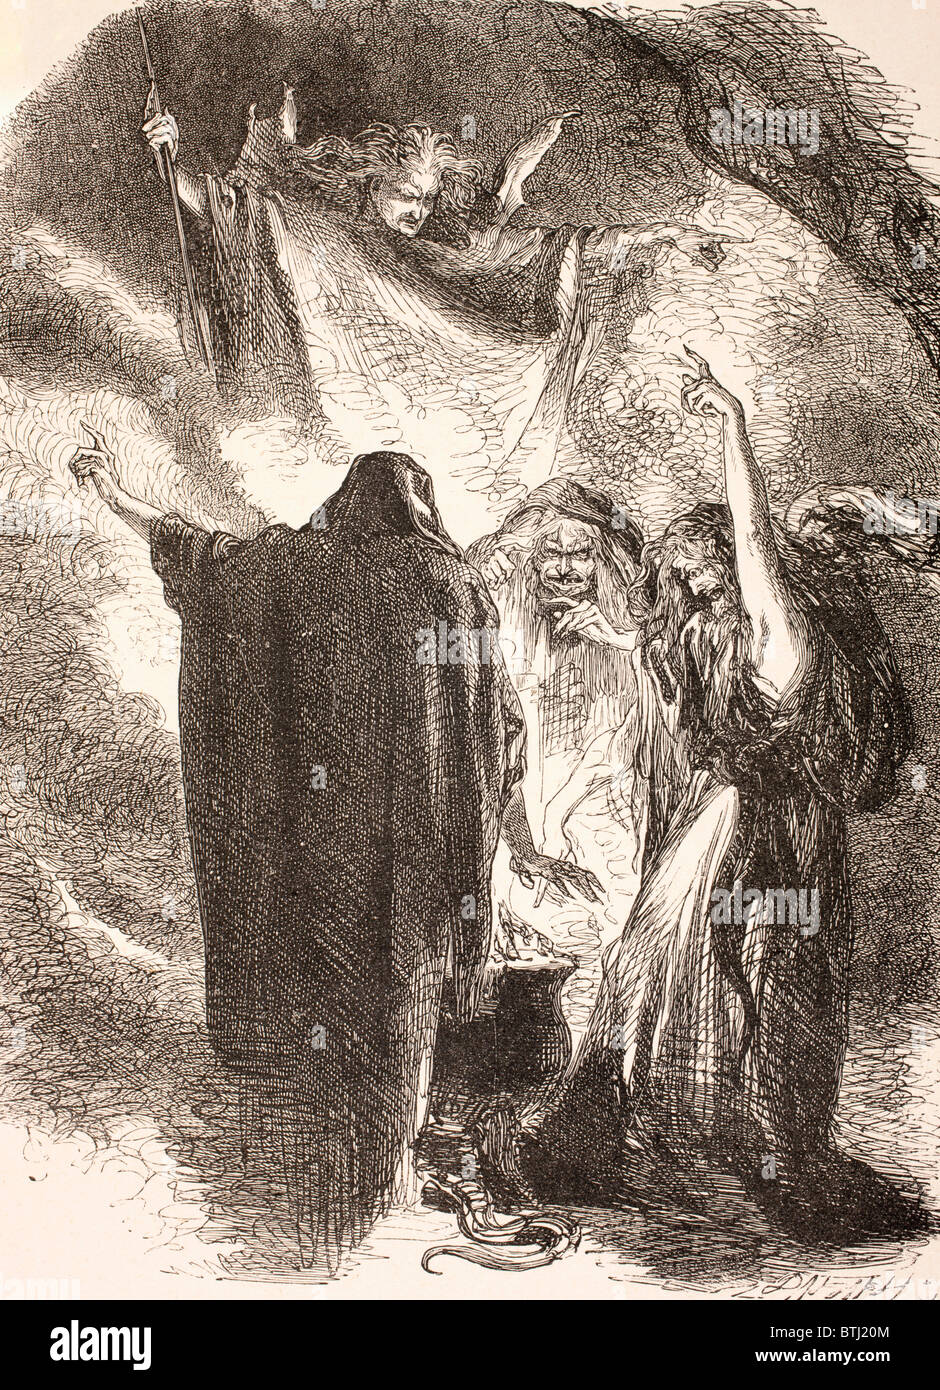 Illustration of the witches around their cauldron in William Shakespeare’s Macbeth. Stock Photo